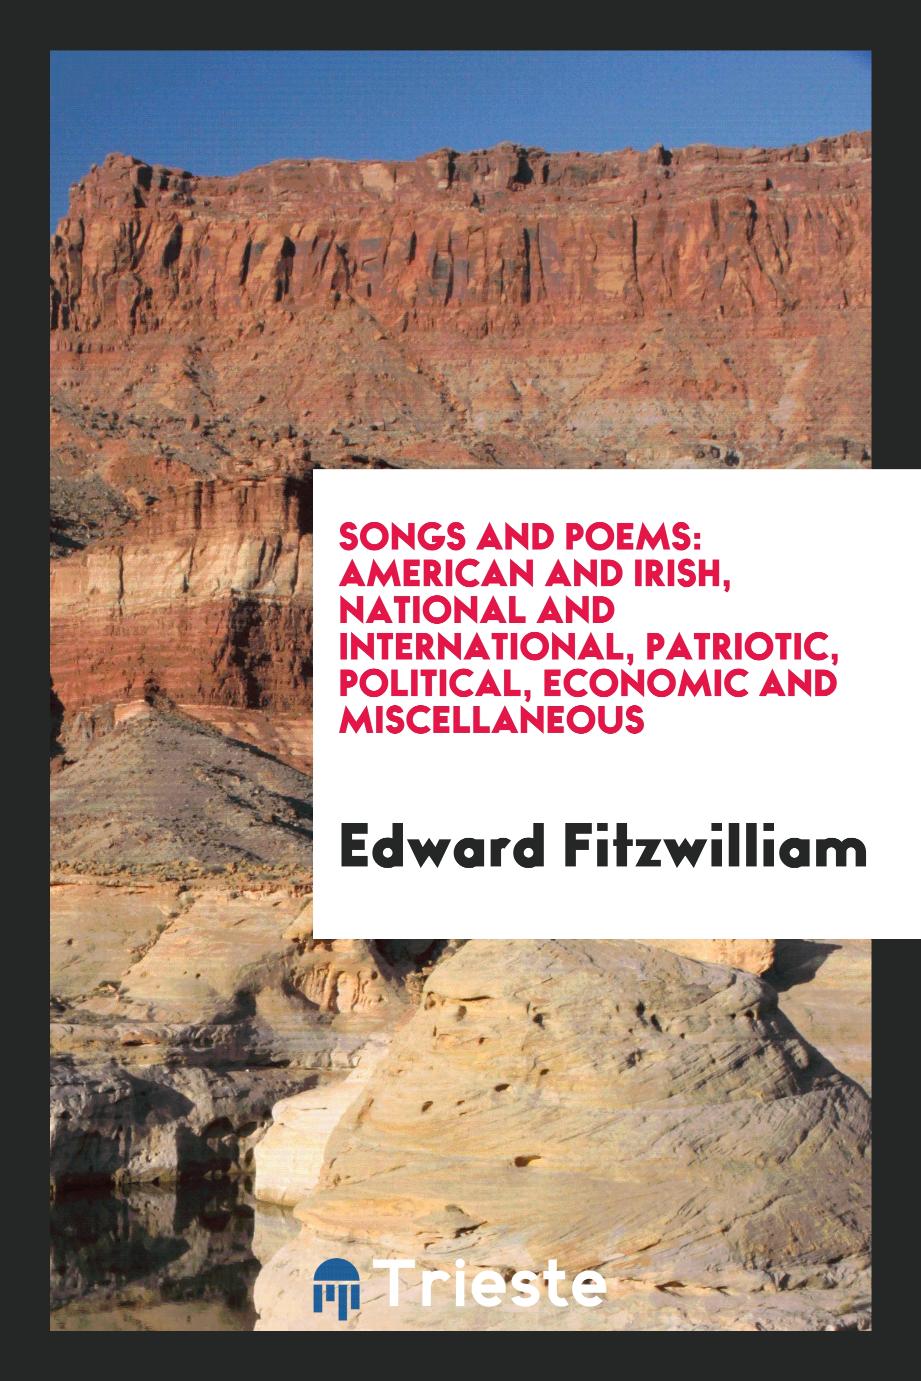 Songs and poems: american and Irish, national and international, patriotic, political, economic and miscellaneous